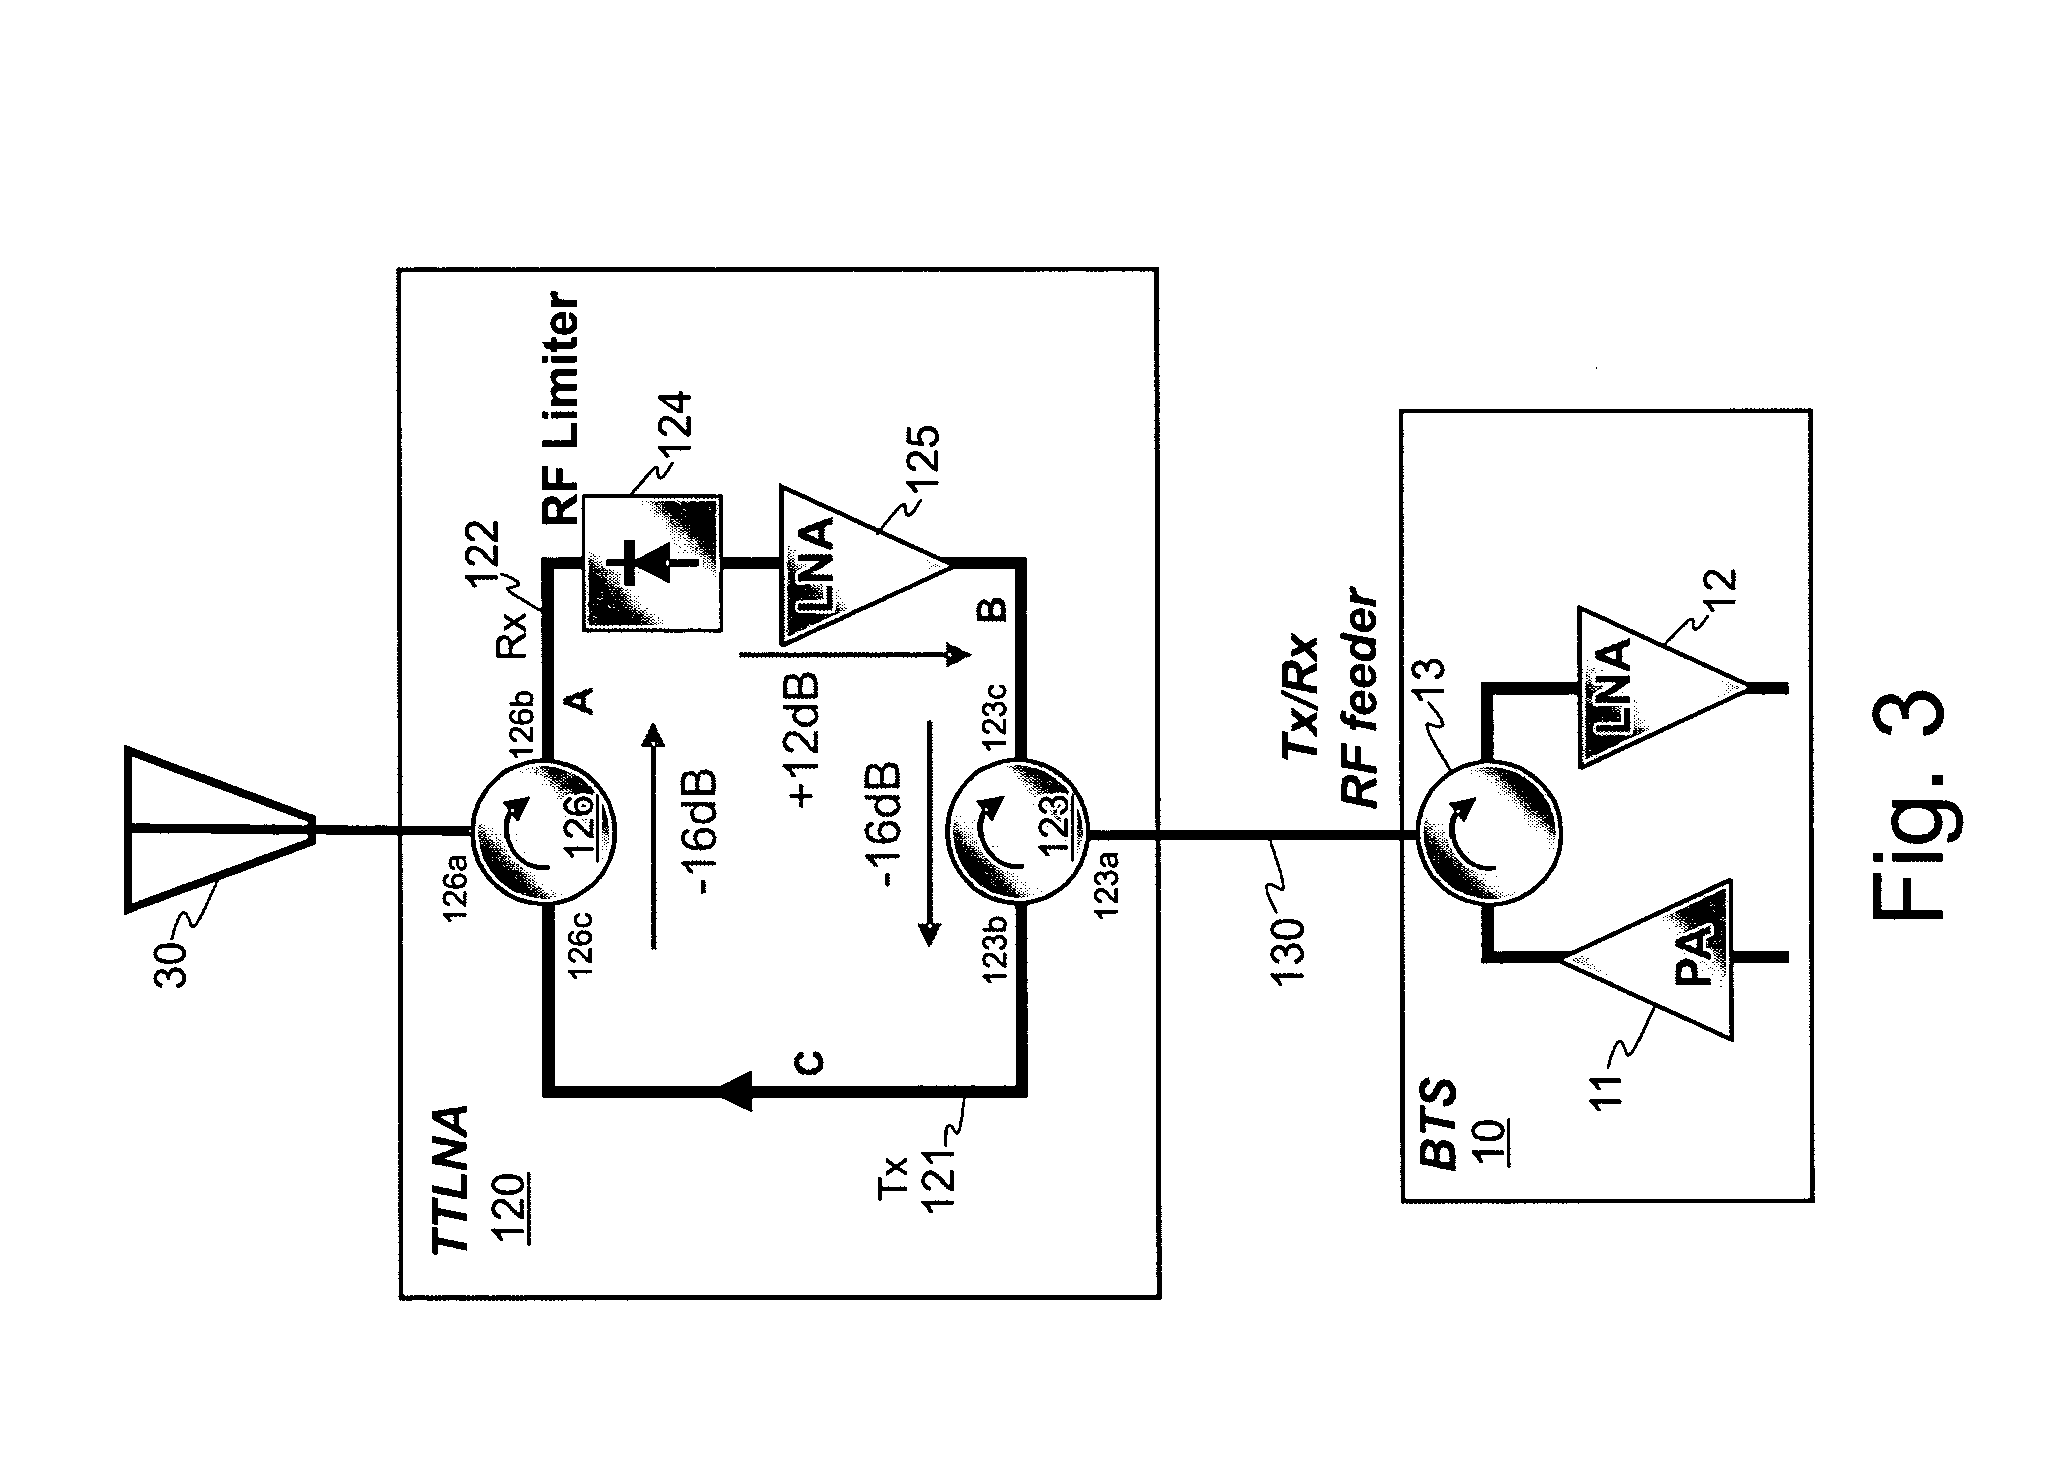 Stand-alone low noise amplifier